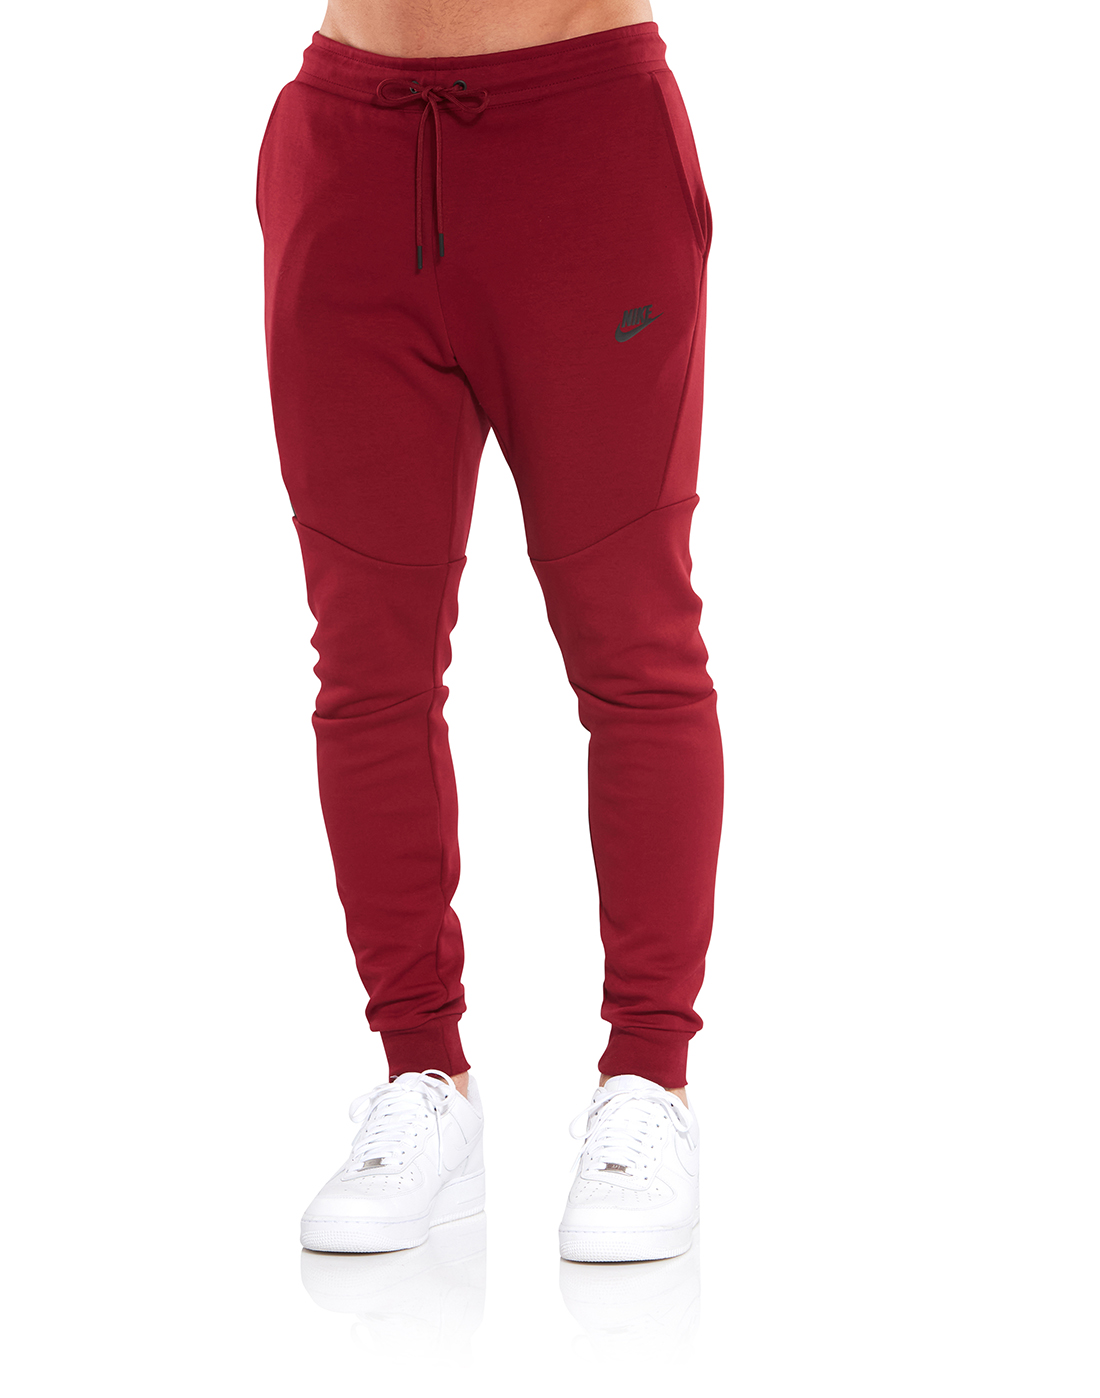 Nike Mens Tech Fleece Joggers - Red | Life Style Sports IE